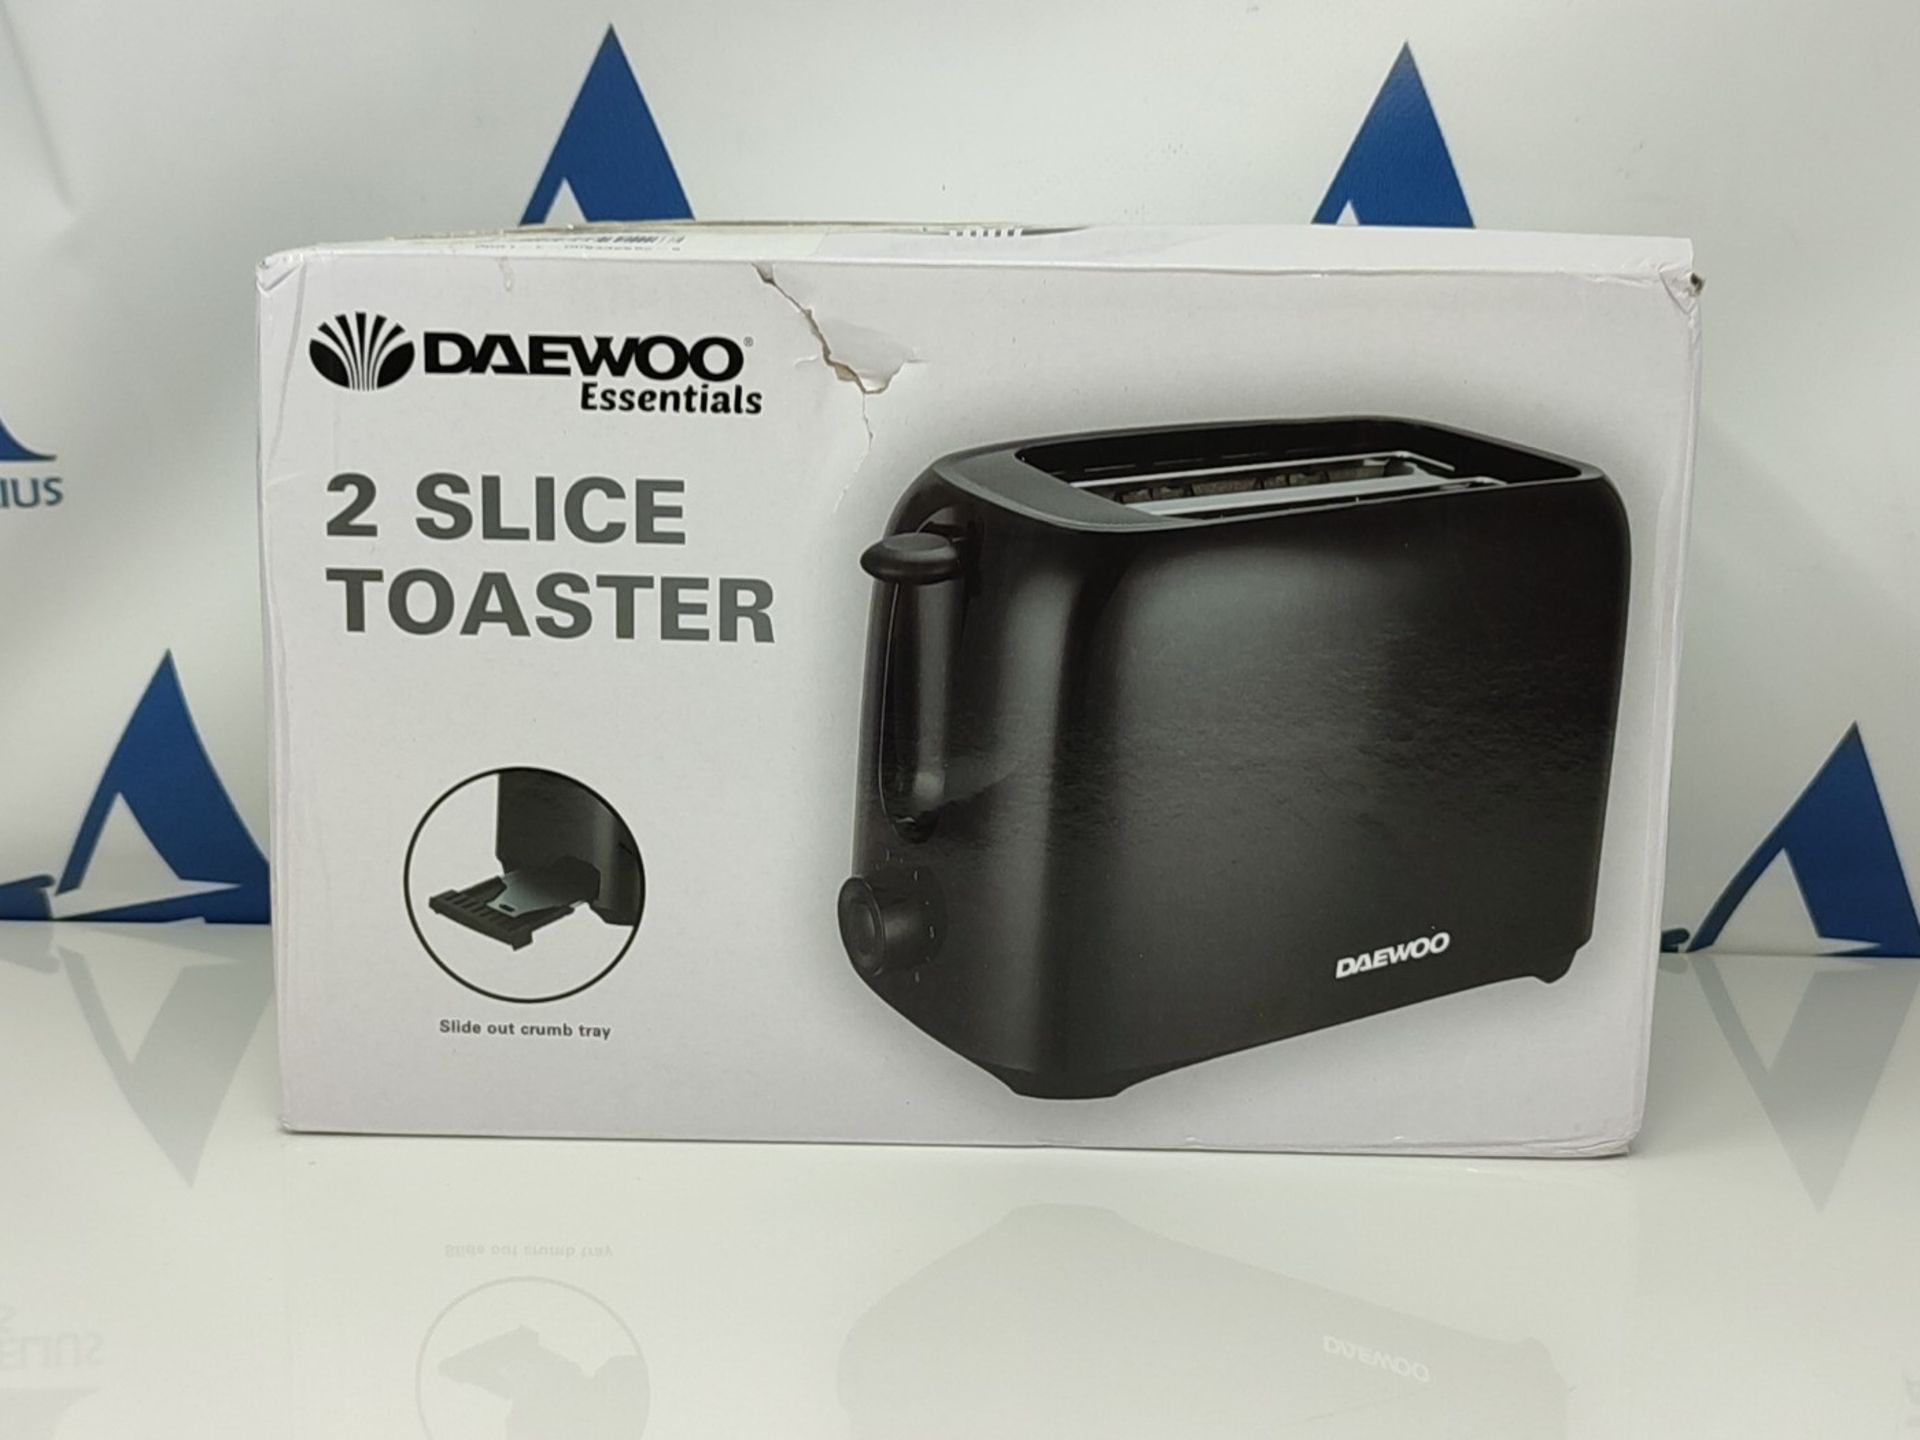 Daewoo Essentials, Plastic 2 Slice Toaster, Black, Variable Browning Controls, Cancel - Image 2 of 3